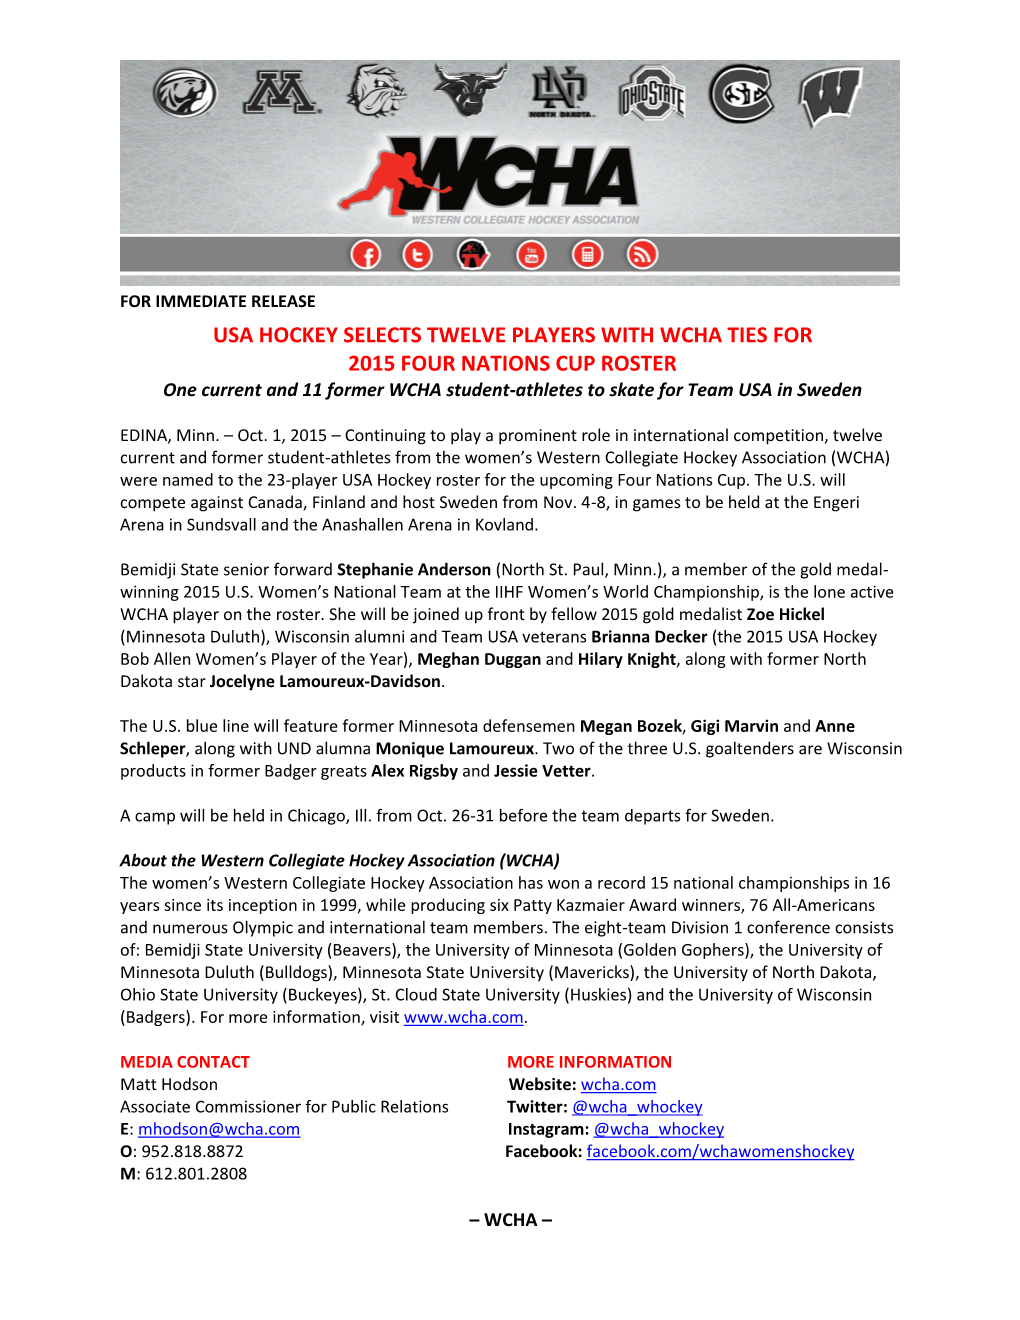 USA HOCKEY SELECTS TWELVE PLAYERS with WCHA TIES for 2015 FOUR NATIONS CUP ROSTER One Current and 11 Former WCHA Student-Athletes to Skate for Team USA in Sweden